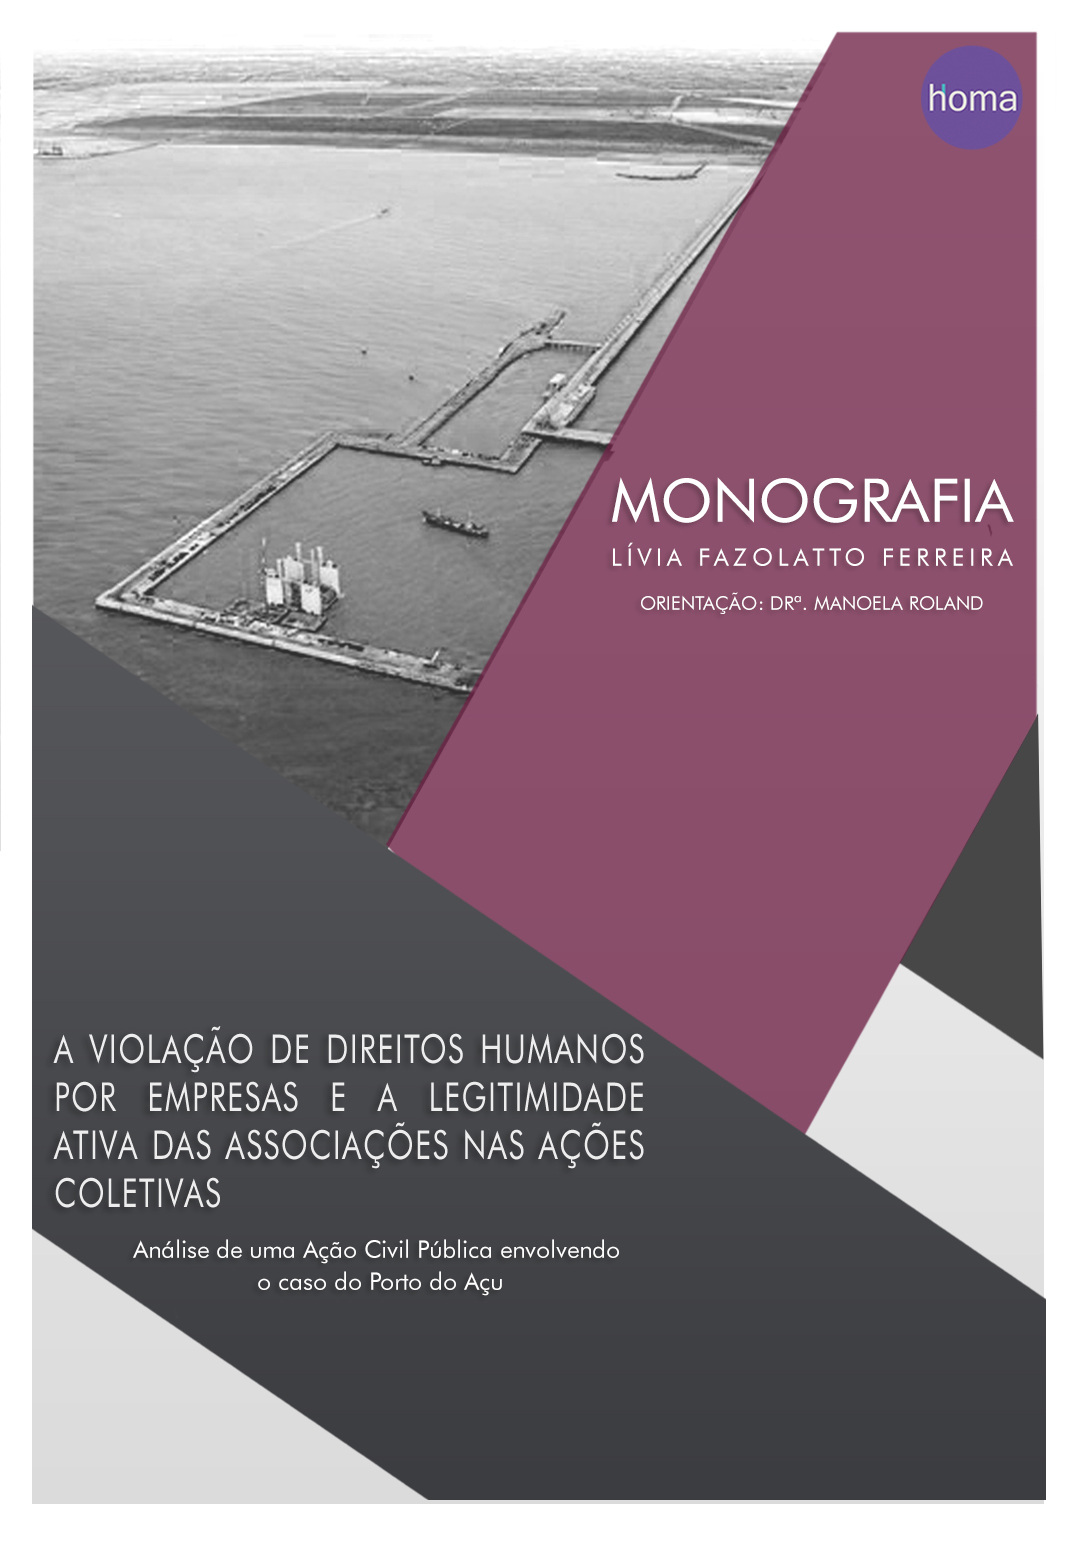 The violation of Human Rights by companies and the active legitimacy of associations in collective actions: analysis of a Public Civil Action involving the case of the Port of Açu